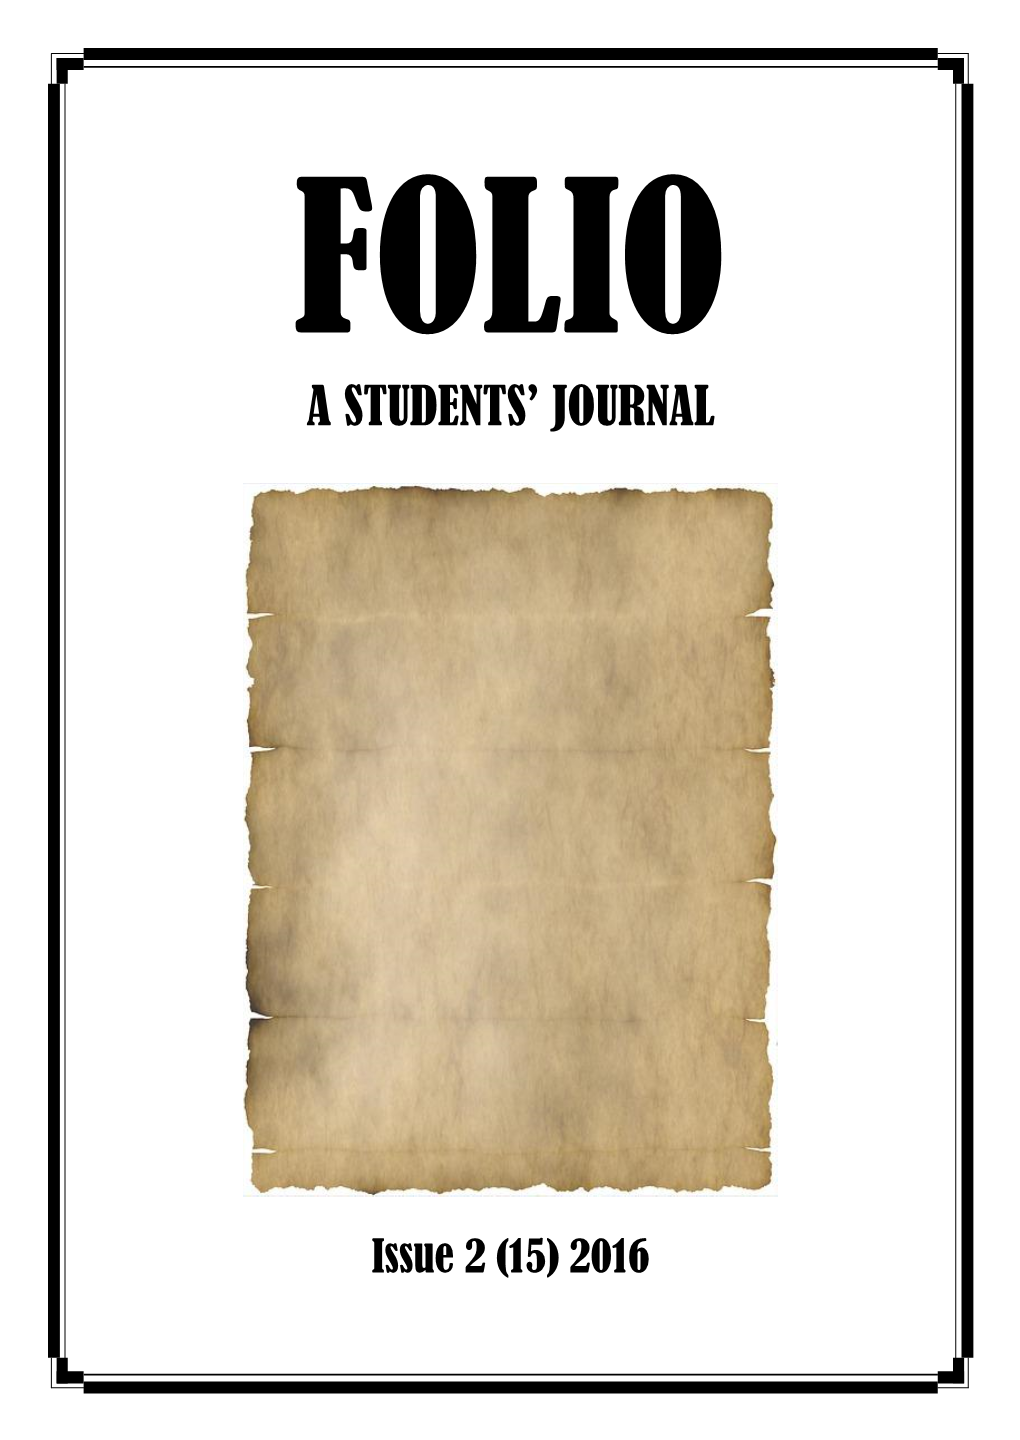 A Students' Journal